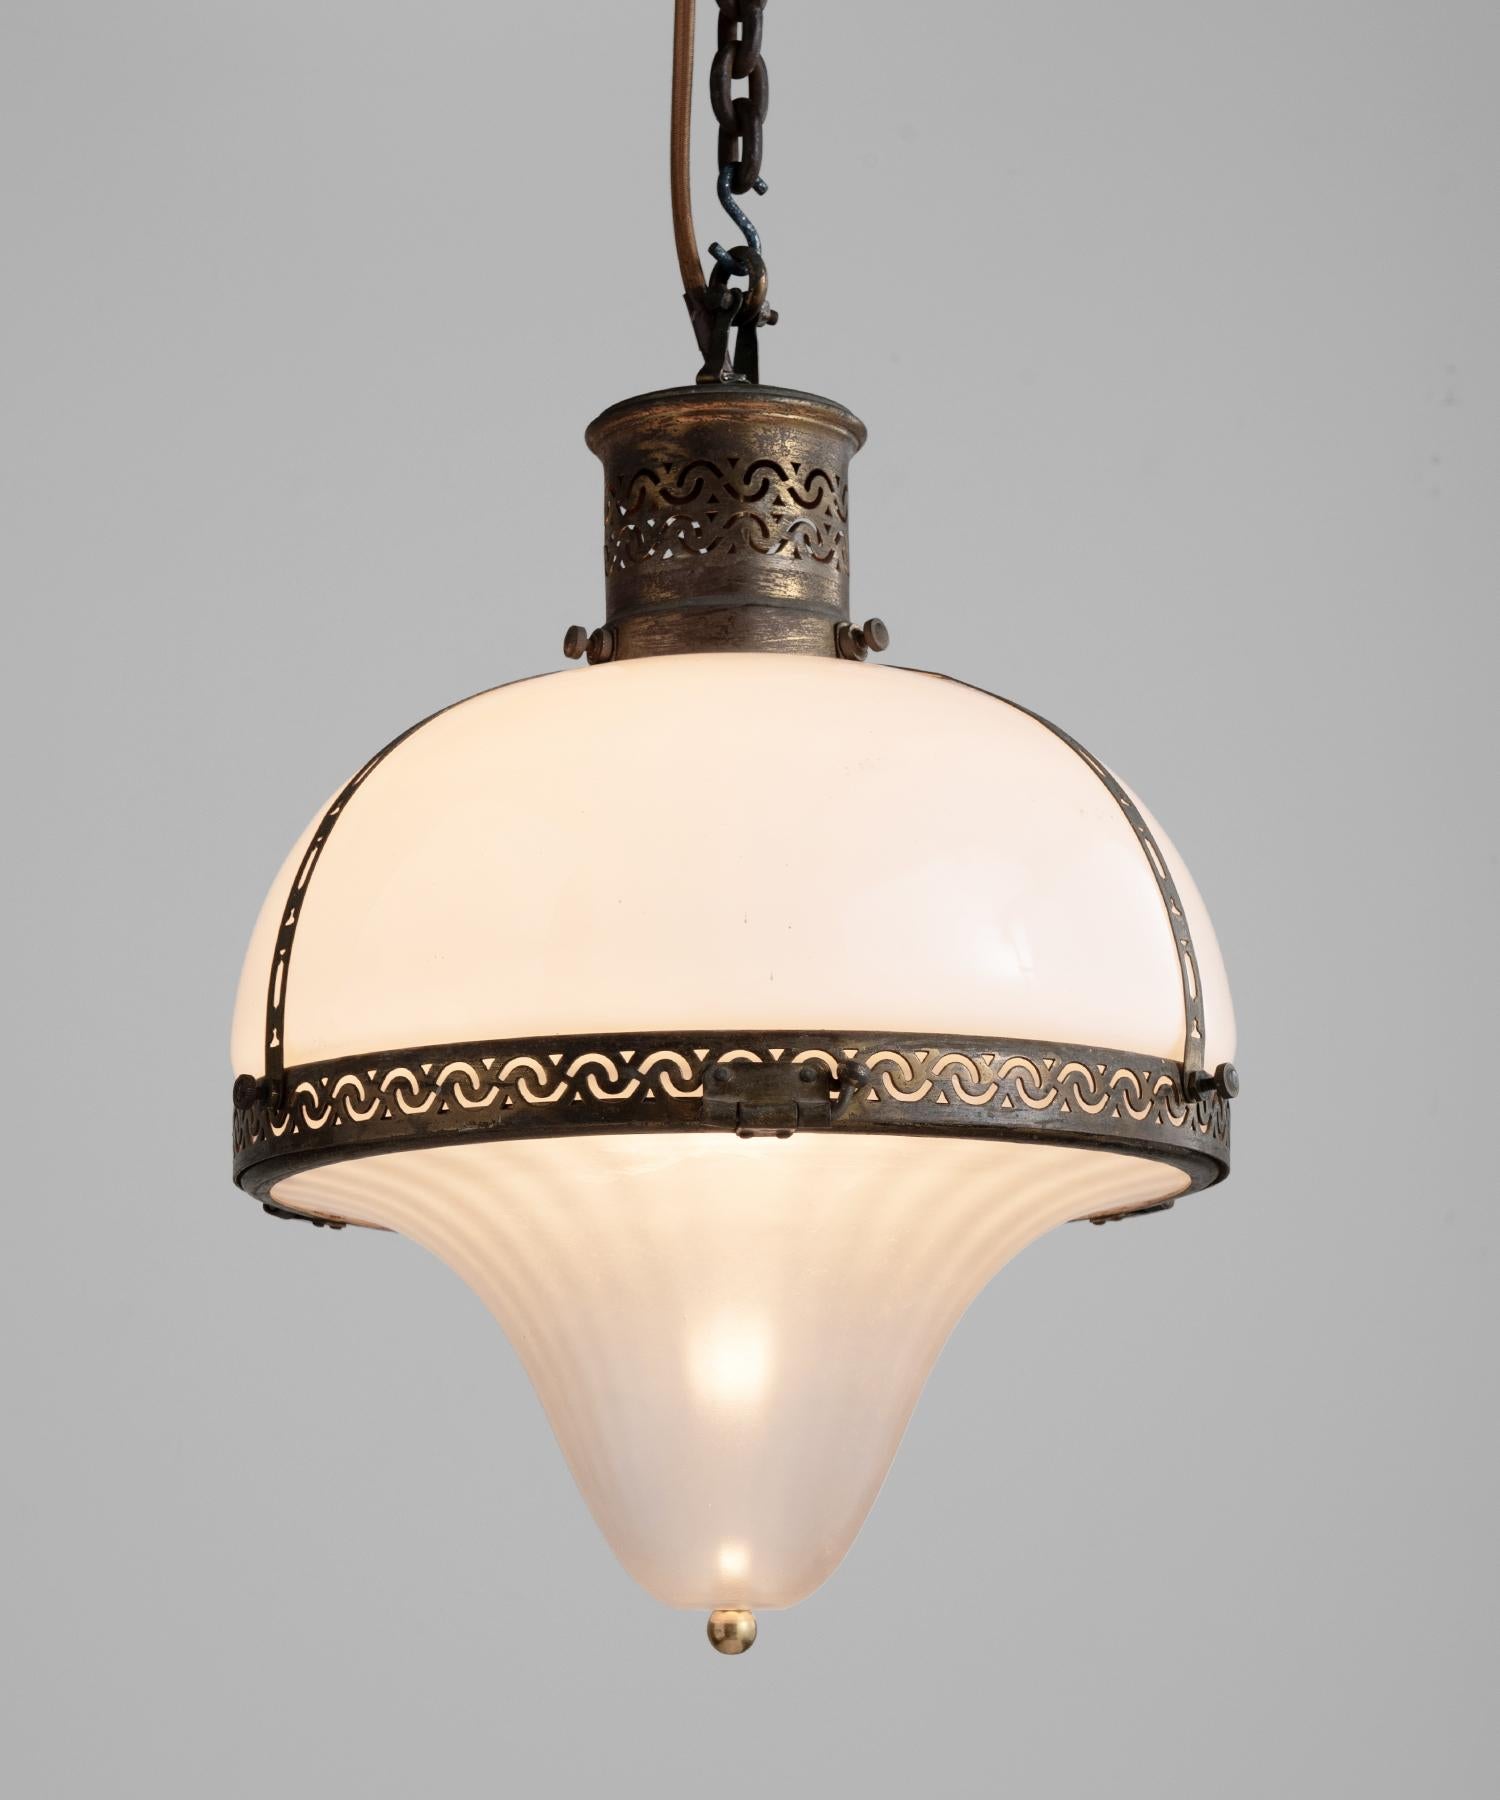 Opaline teardrop pendant, France, circa 1930.

Opaline and frosted glass shades with ornate brass cage and fitter.